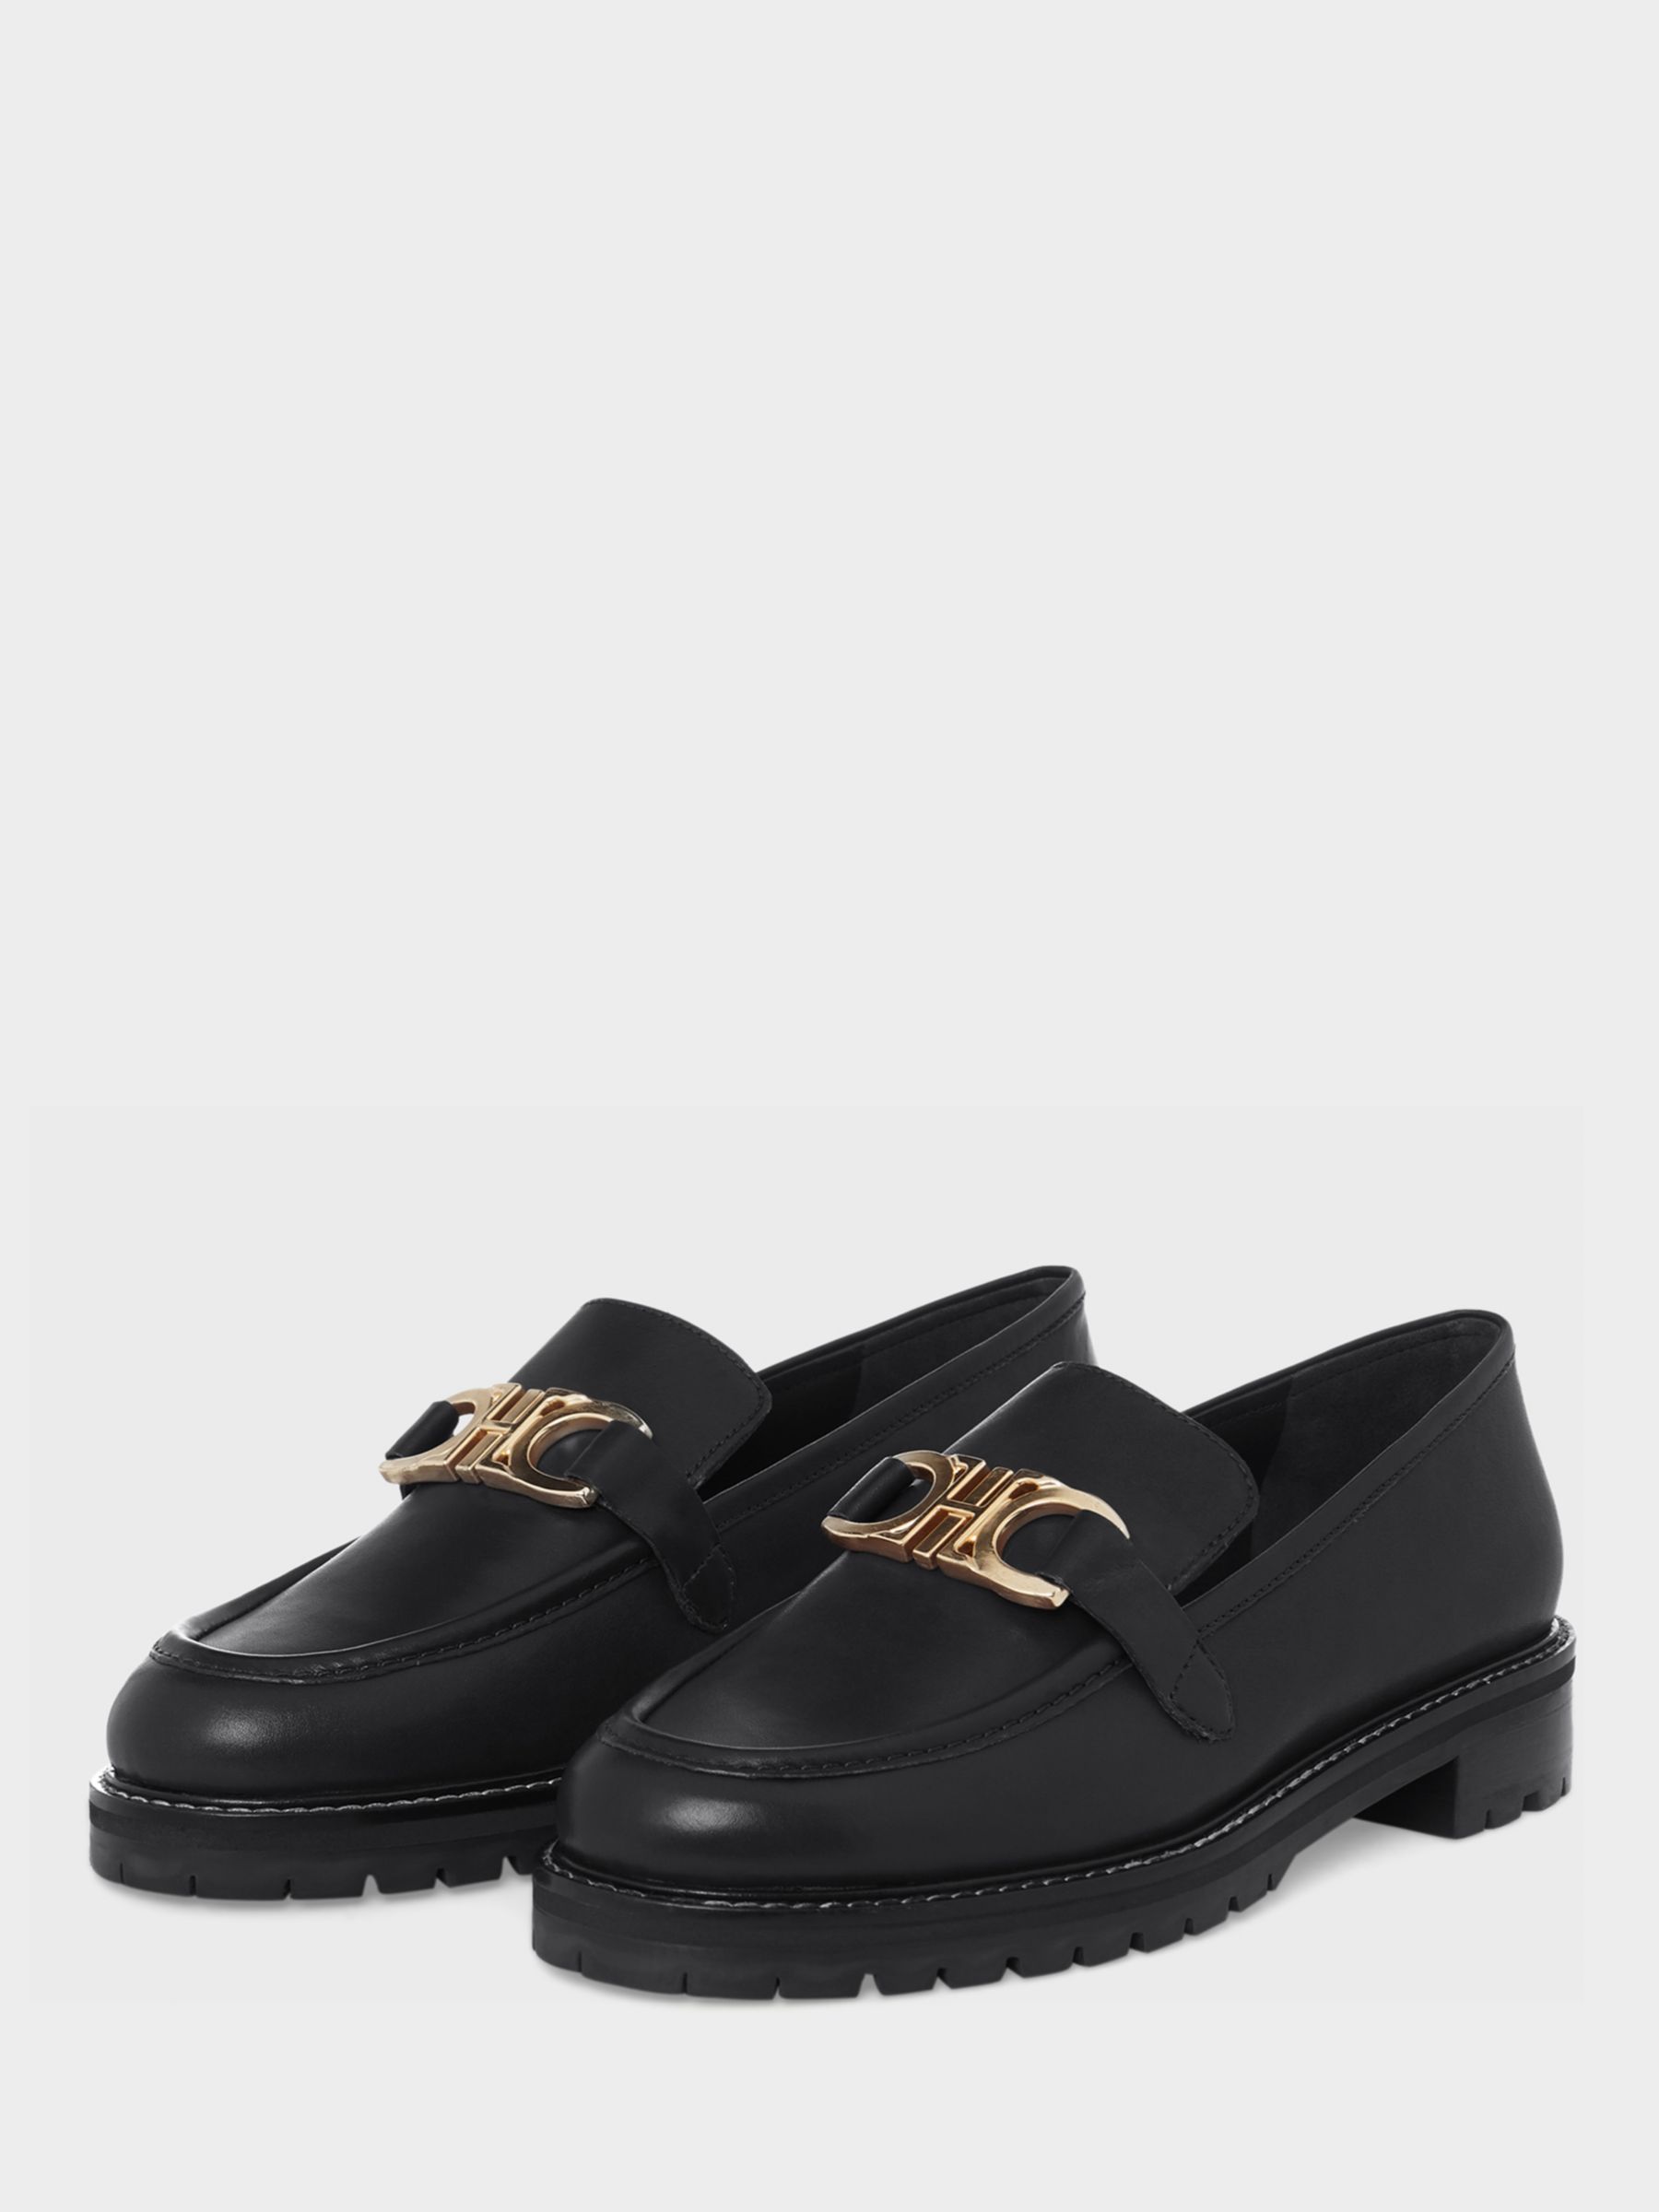 The Best Chanel Quilted Loafers Dupes From $27 - TheBestDupes